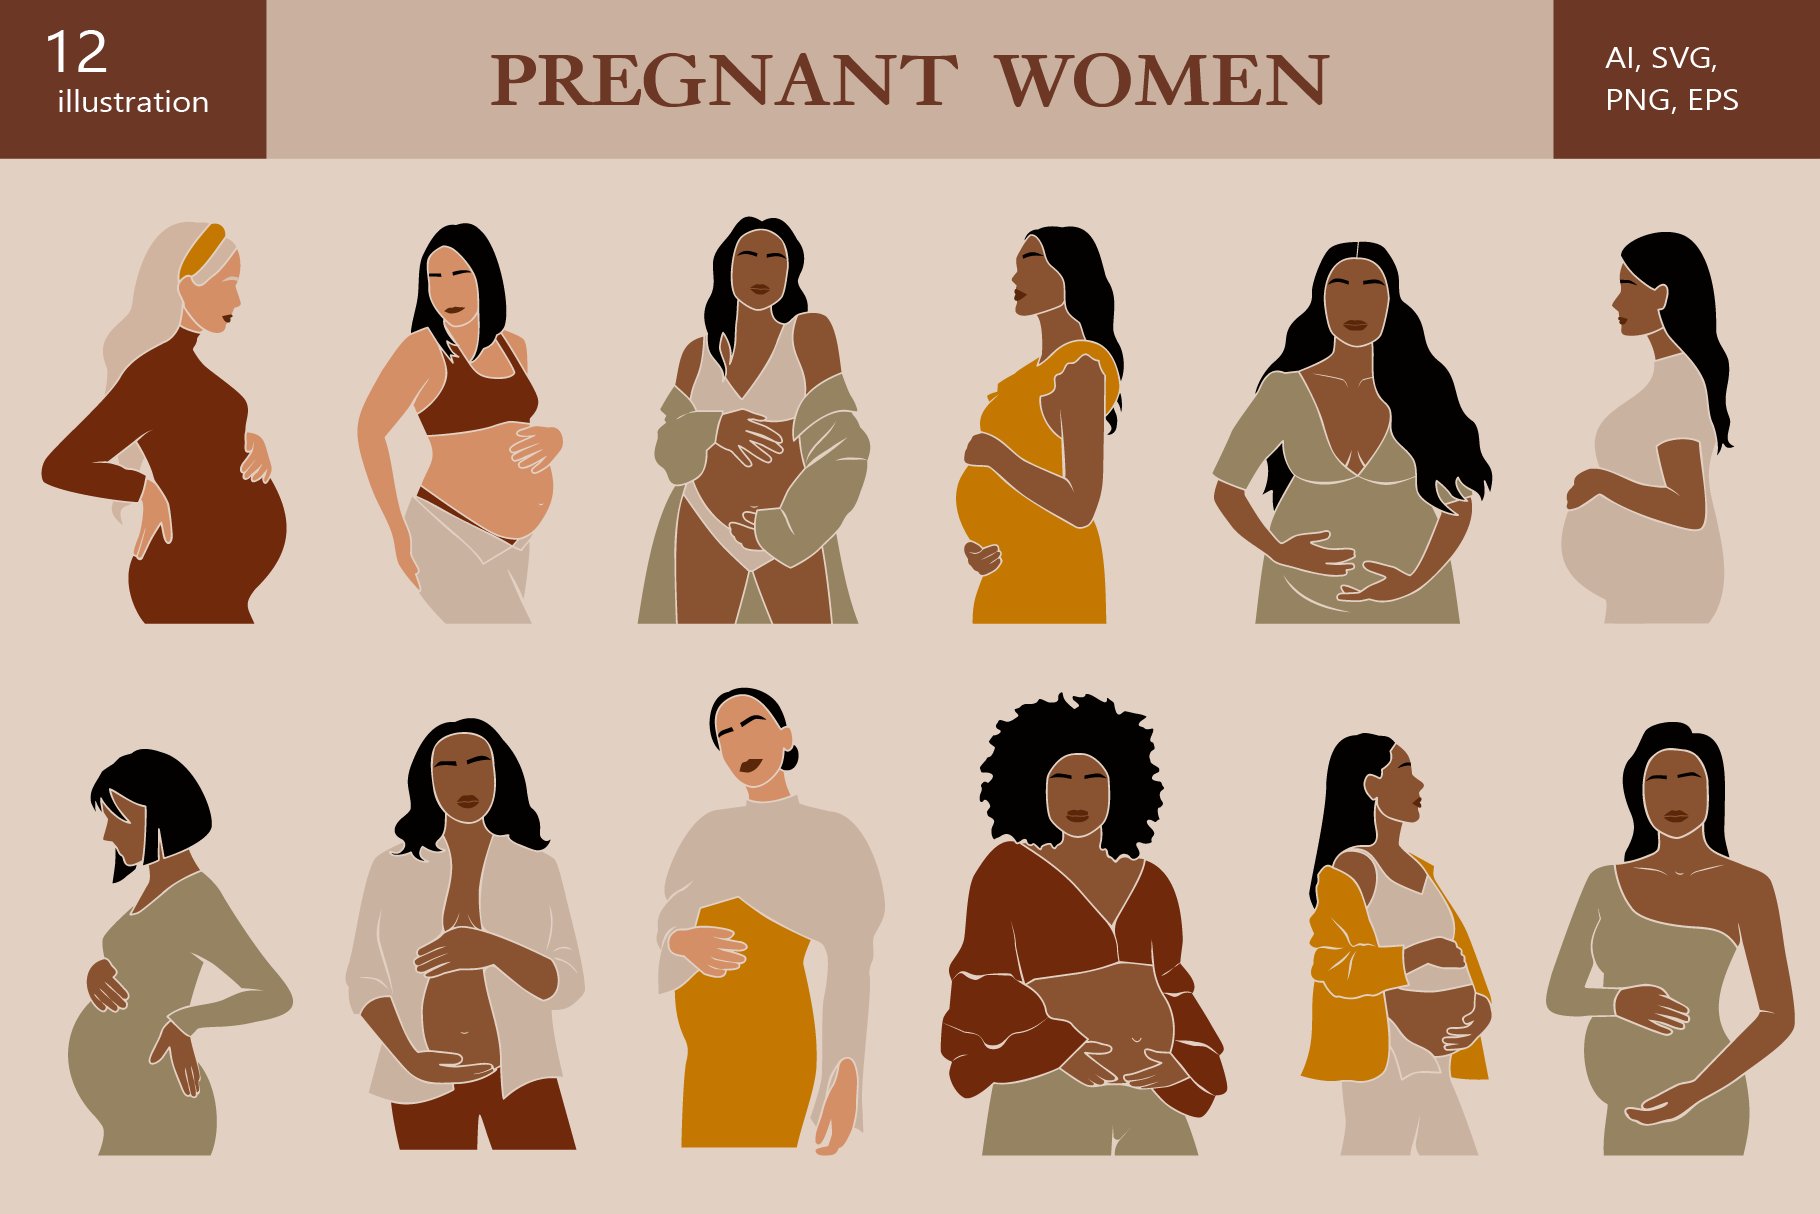 Abstract Pregnant Women cover image.